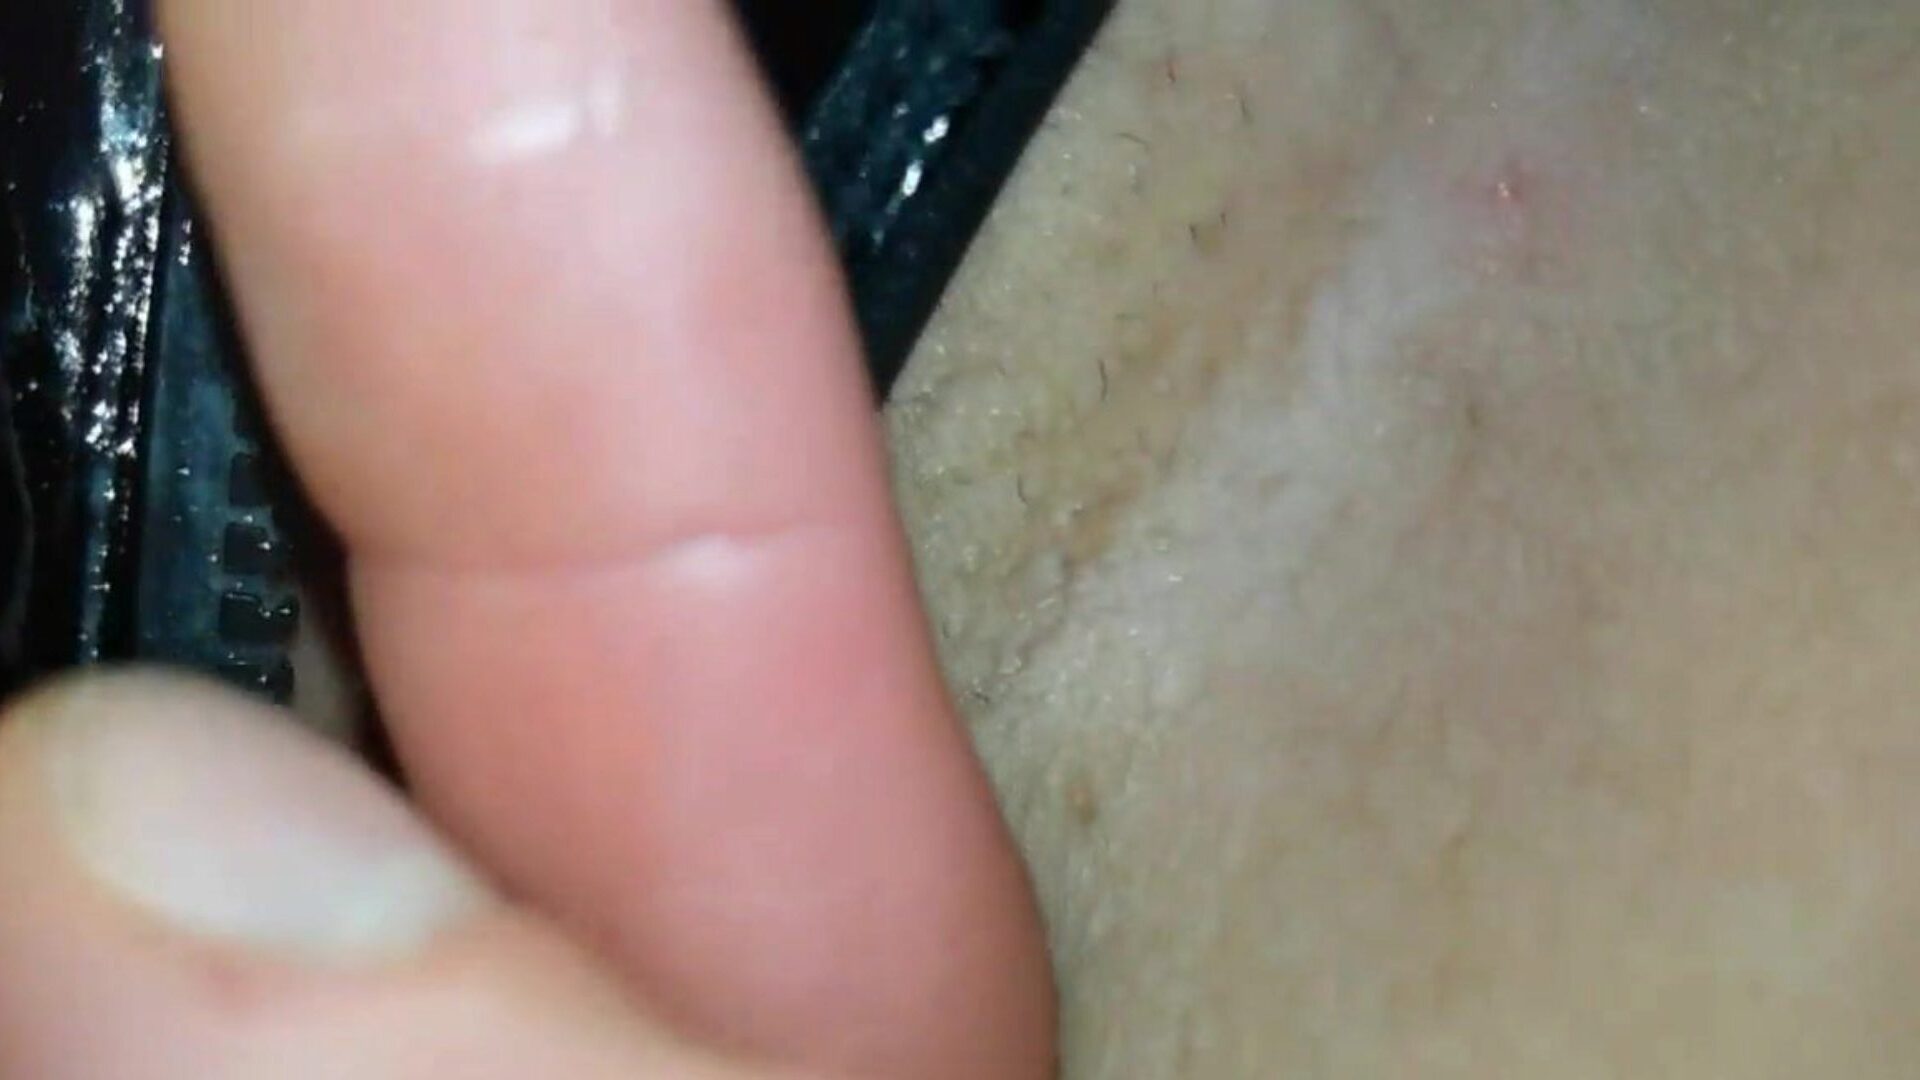 55 Years Of Hurt, So If England Make The Final You Can Make My Big Ass Hurt . Curvy Wife Never Thought England Would Win & Promises Stepson Anal If They Do, Result For Him & England. Real Homemade Amateur Anal.